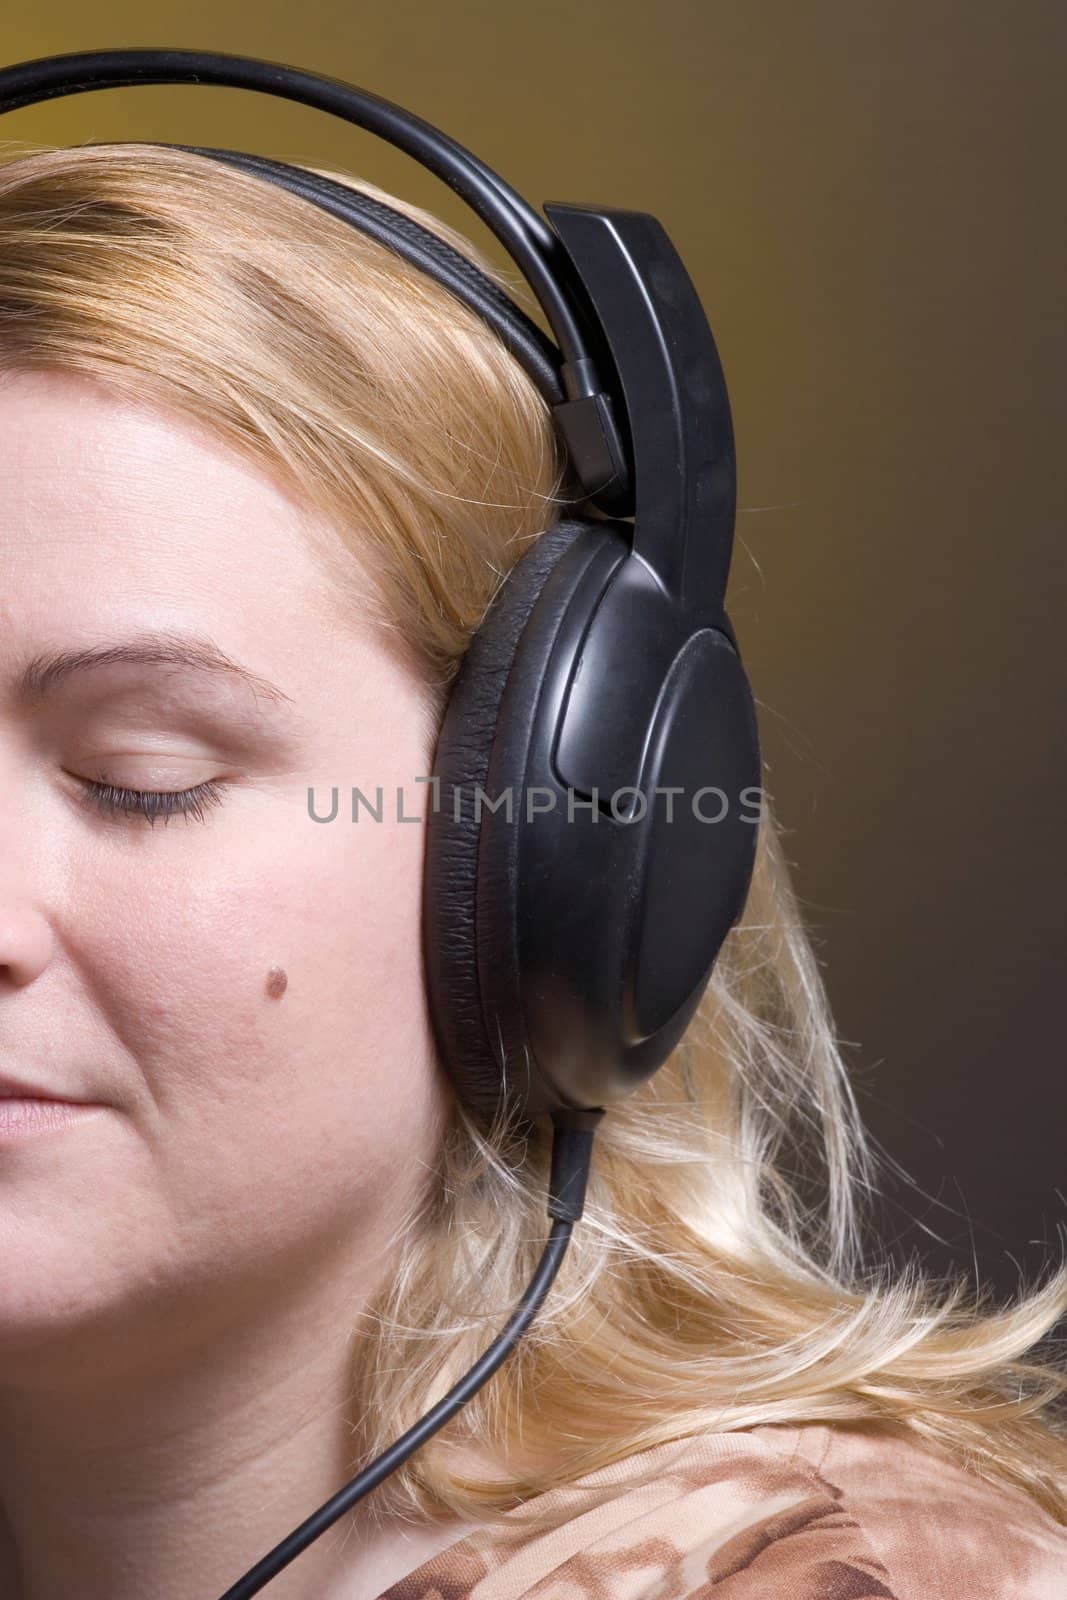 Women listing to relaxing music with her eyes close